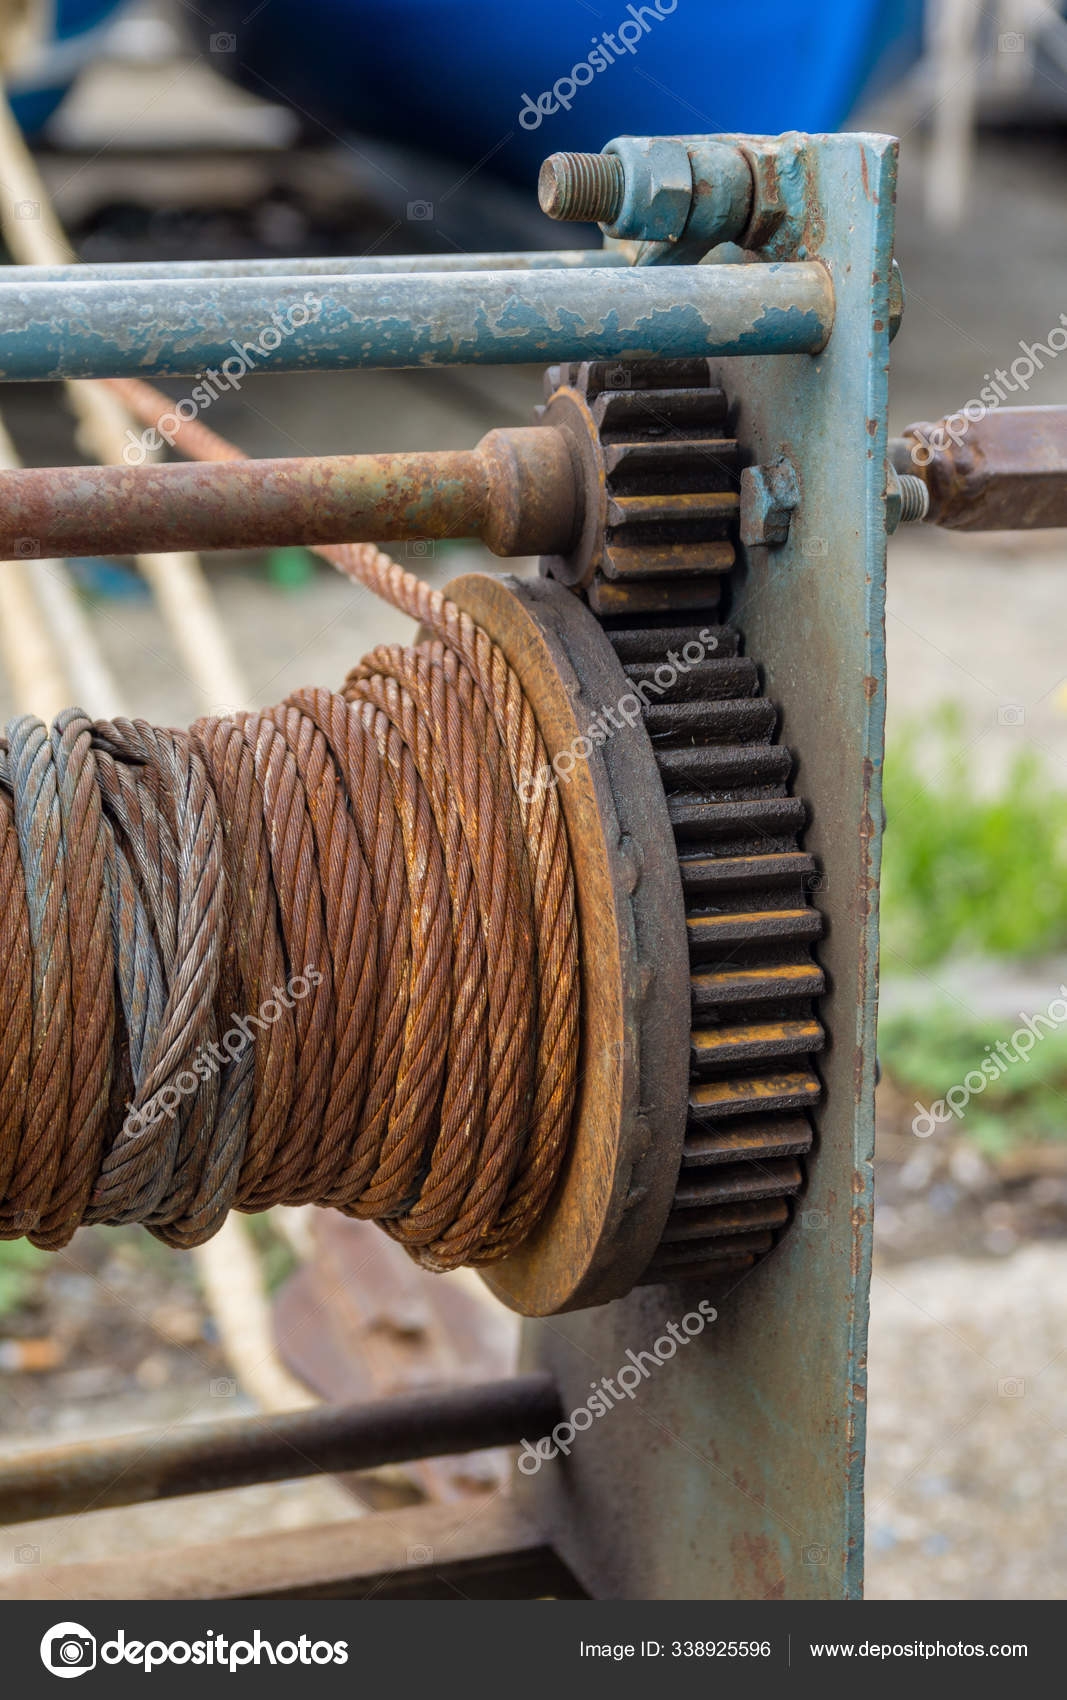 https://st3.depositphotos.com/29384342/33892/i/1600/depositphotos_338925596-stock-photo-cable-winch-steel-cable-fishing.jpg